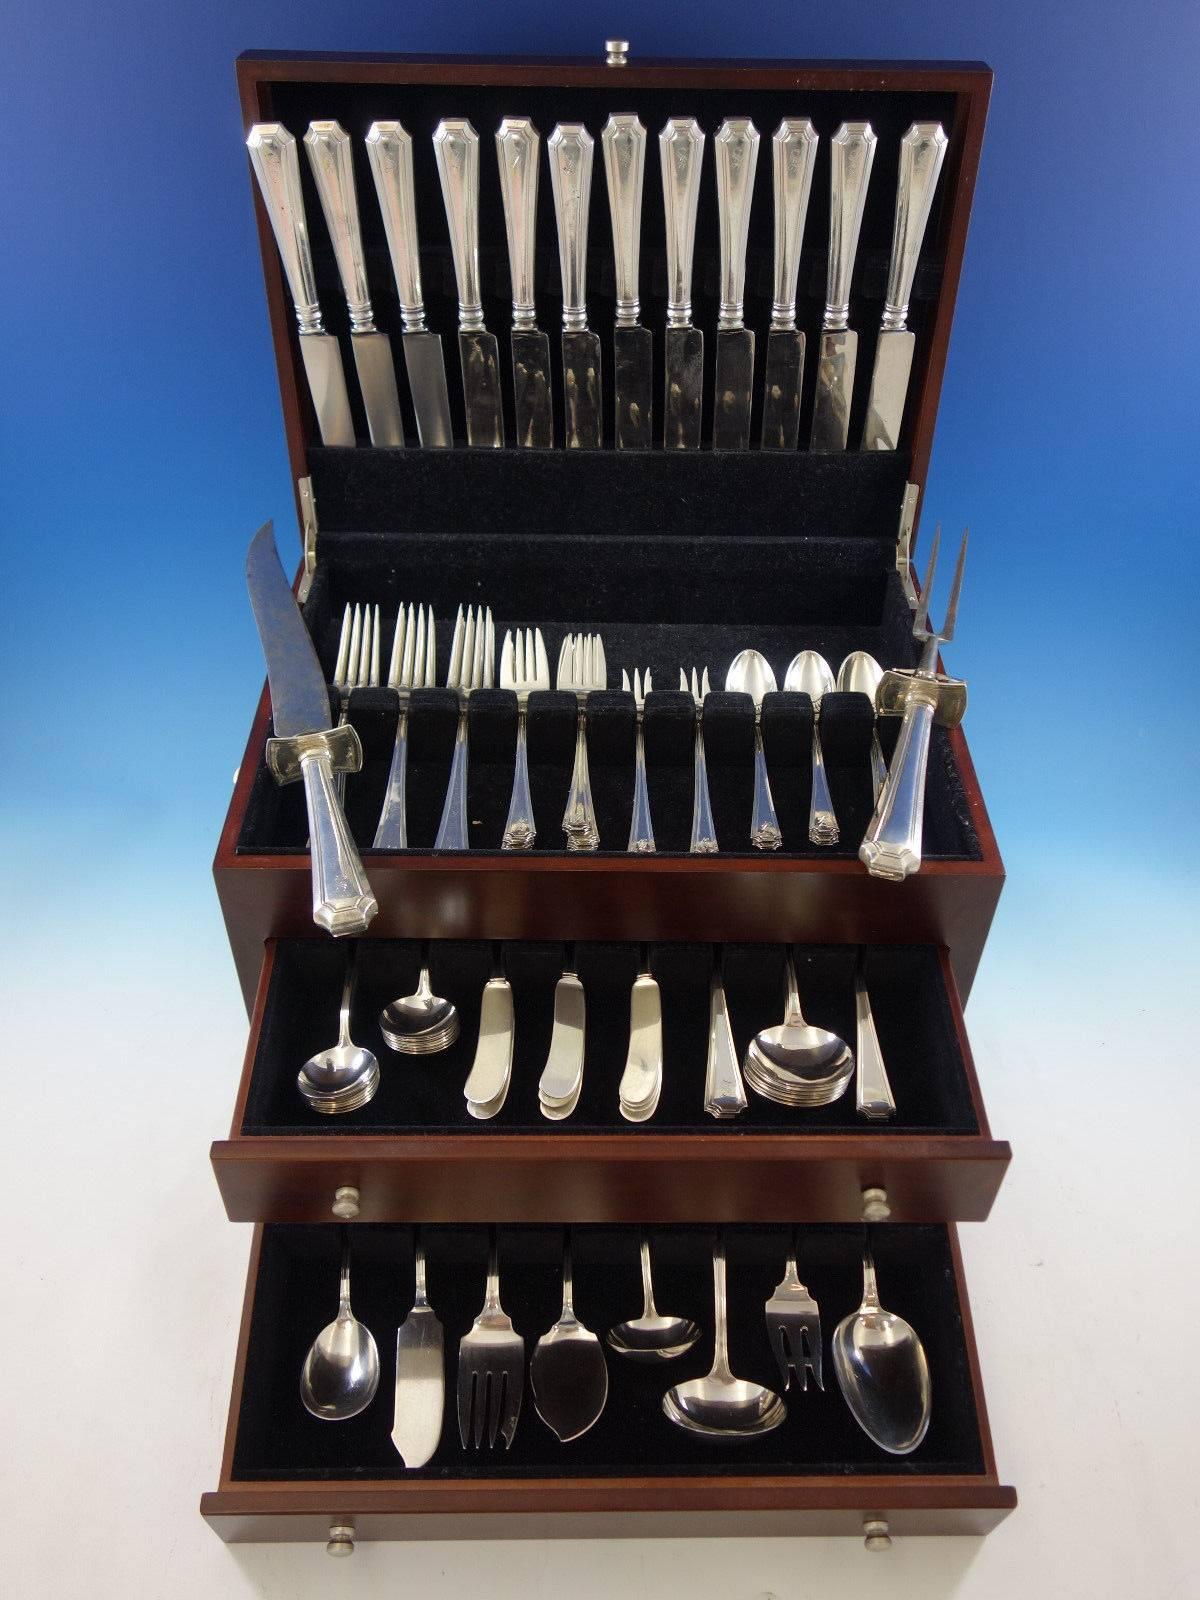 Fairfax by Durgin-Gorham sterling silver flatware set, 106 pieces. This set includes: 

12 dinner size knives, 9 5/8